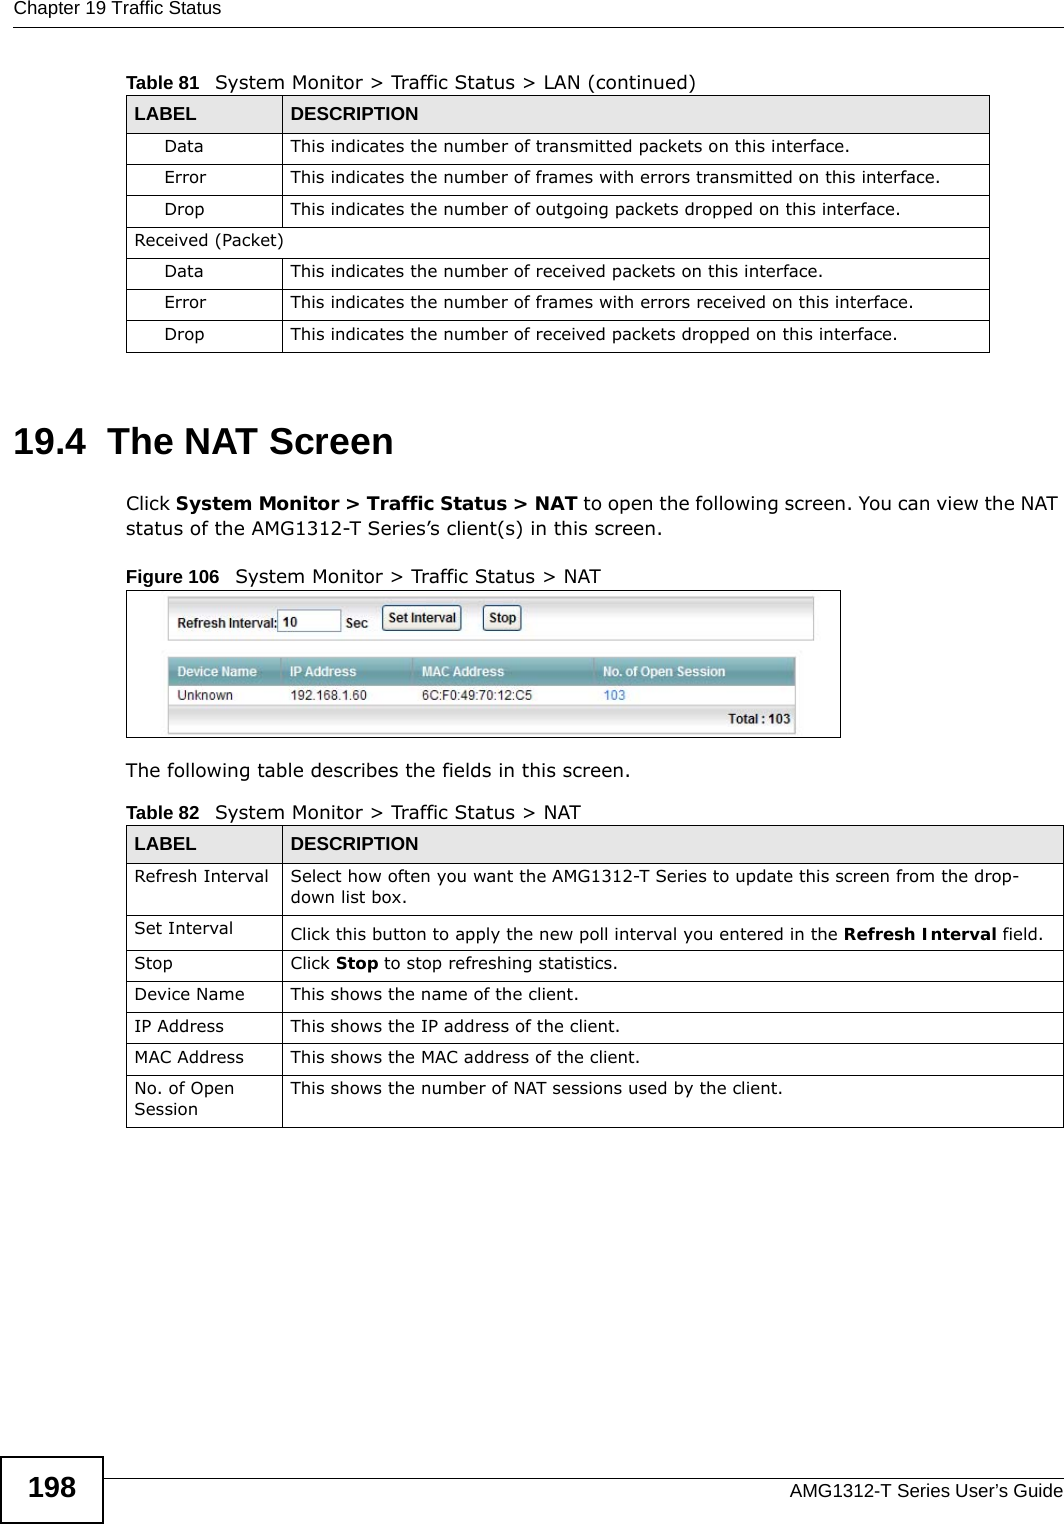 Chapter 19 Traffic StatusAMG1312-T Series User’s Guide19819.4  The NAT ScreenClick System Monitor &gt; Traffic Status &gt; NAT to open the following screen. You can view the NAT status of the AMG1312-T Series’s client(s) in this screen.Figure 106   System Monitor &gt; Traffic Status &gt; NATThe following table describes the fields in this screen.Data  This indicates the number of transmitted packets on this interface.Error This indicates the number of frames with errors transmitted on this interface.Drop This indicates the number of outgoing packets dropped on this interface.Received (Packet) Data  This indicates the number of received packets on this interface.Error This indicates the number of frames with errors received on this interface.Drop This indicates the number of received packets dropped on this interface.Table 81   System Monitor &gt; Traffic Status &gt; LAN (continued)LABEL DESCRIPTIONTable 82   System Monitor &gt; Traffic Status &gt; NATLABEL DESCRIPTIONRefresh Interval Select how often you want the AMG1312-T Series to update this screen from the drop-down list box.Set Interval Click this button to apply the new poll interval you entered in the Refresh Interval field.Stop Click Stop to stop refreshing statistics.Device Name This shows the name of the client.IP Address This shows the IP address of the client.MAC Address This shows the MAC address of the client.No. of Open SessionThis shows the number of NAT sessions used by the client.